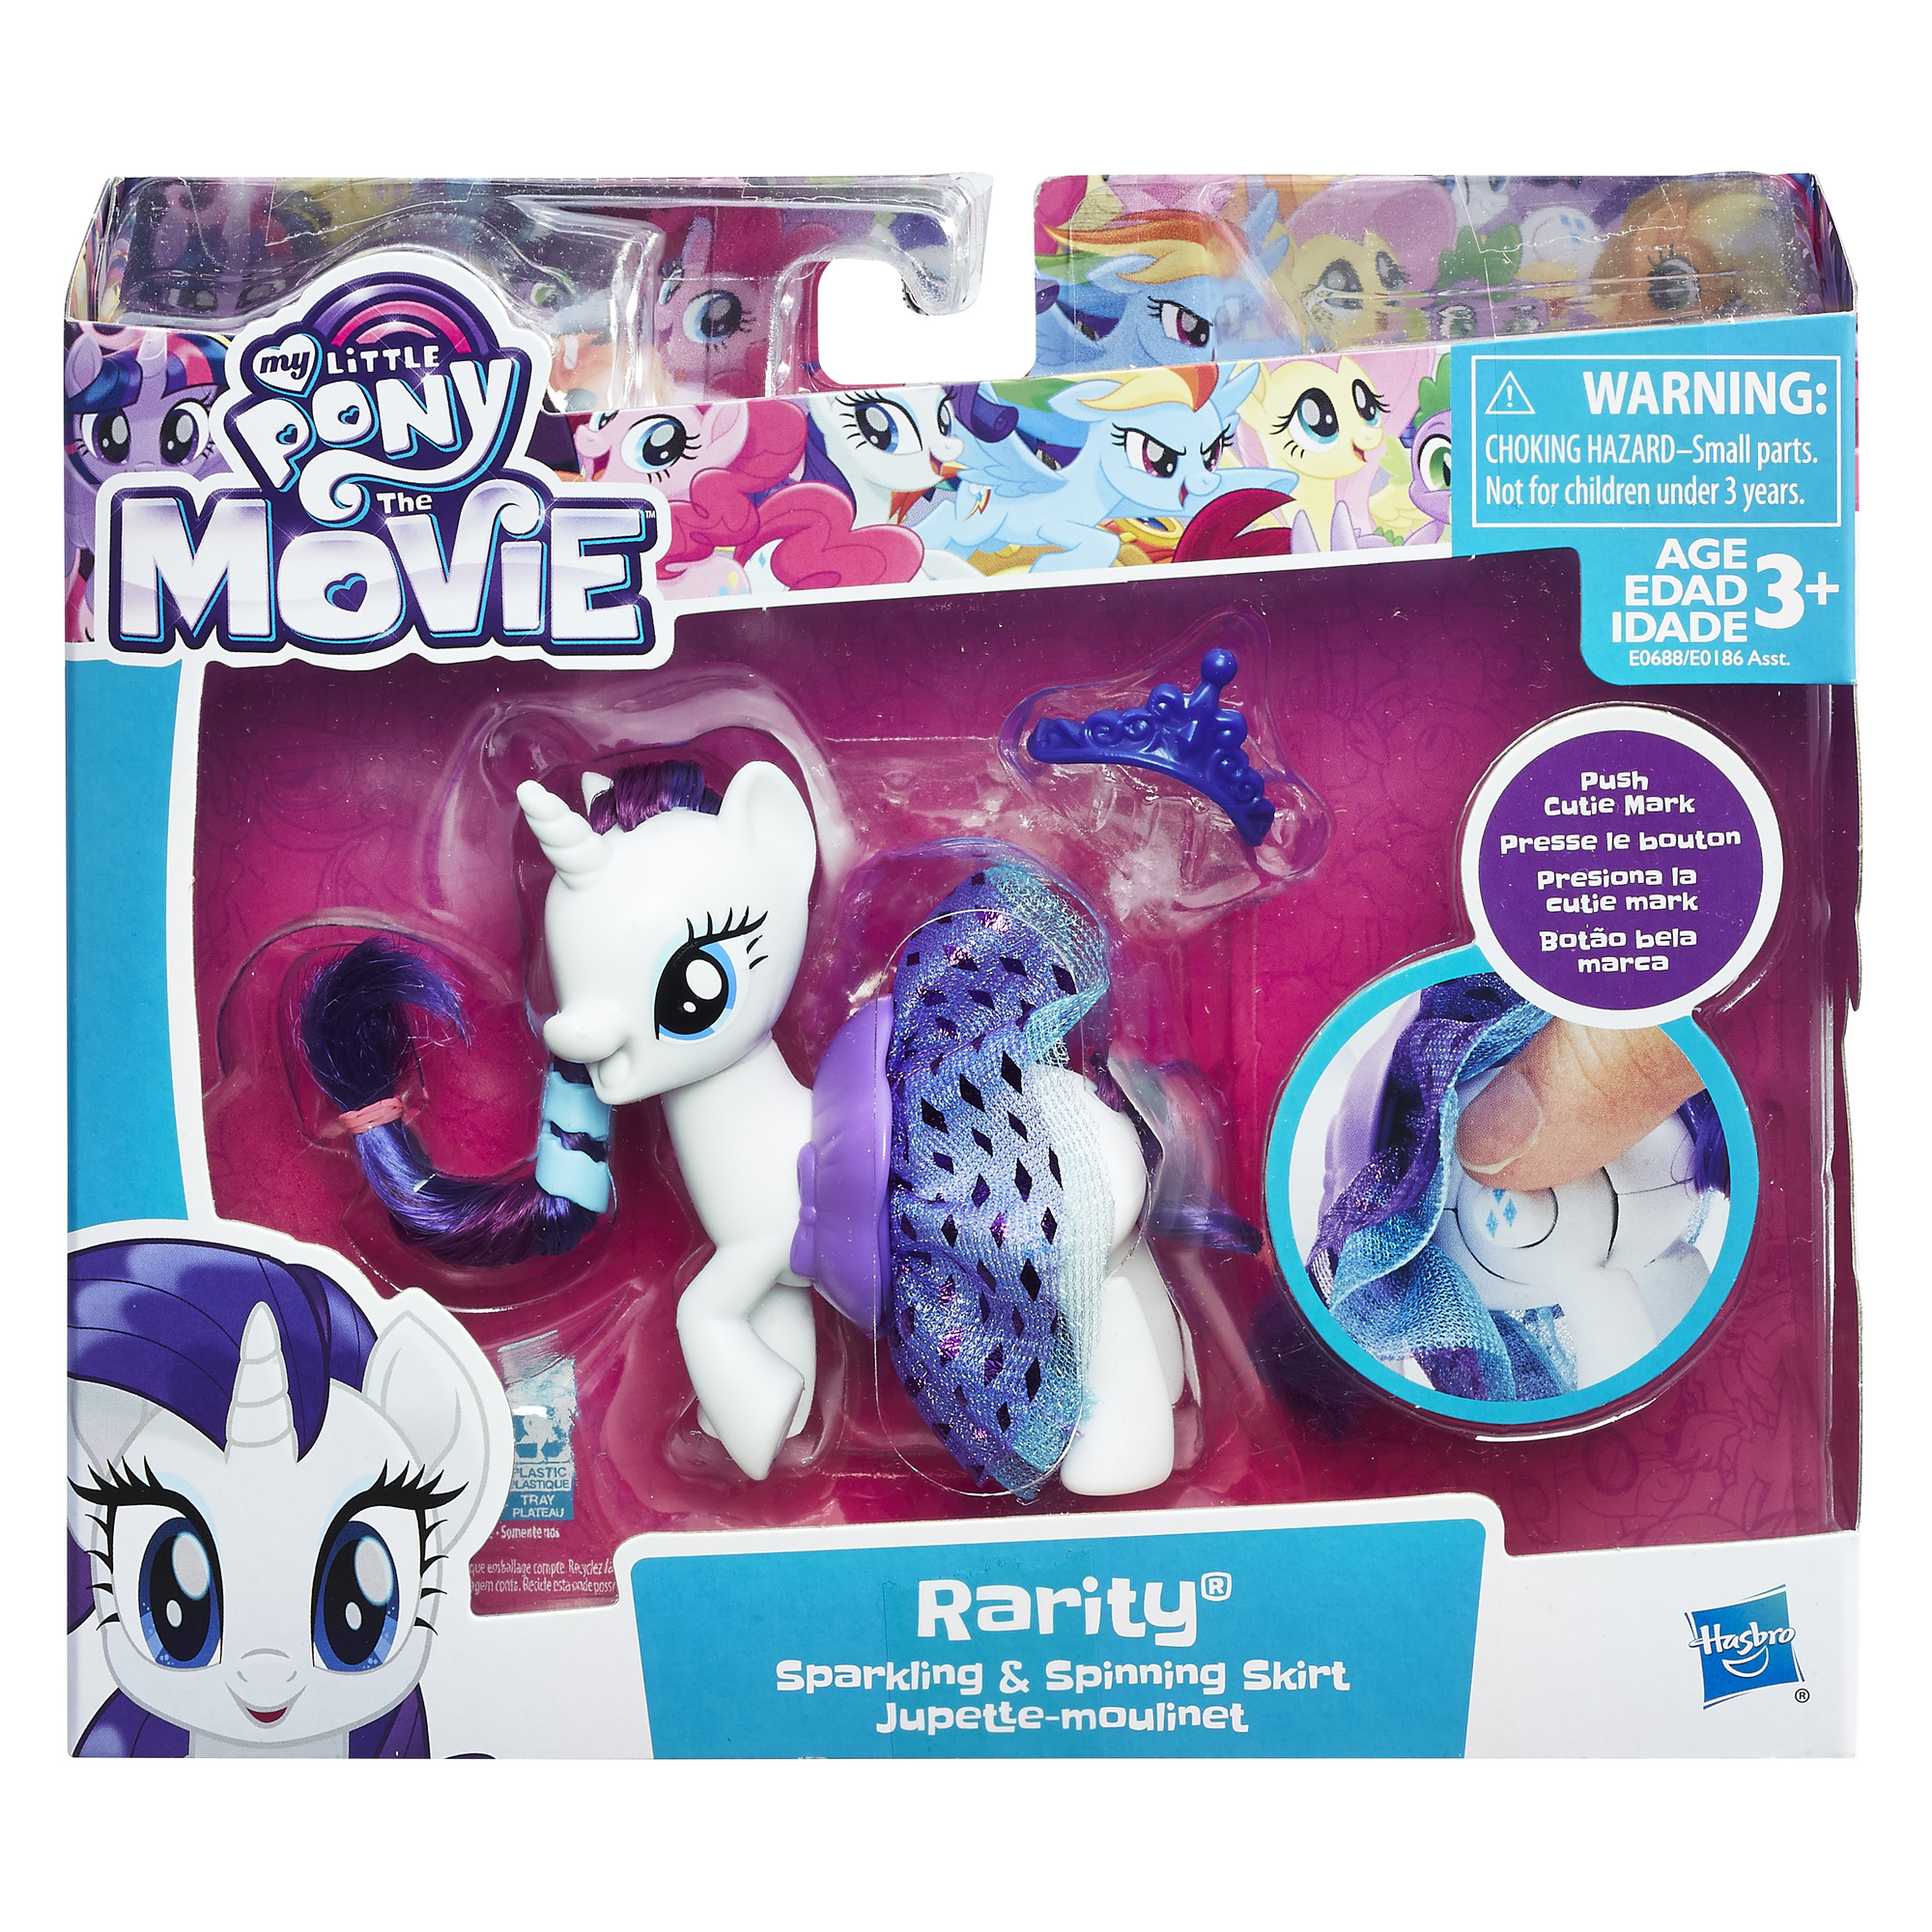 My Little Pony: The Movie Sparkling & Spinning Skirt Rarity - image 2 of 7